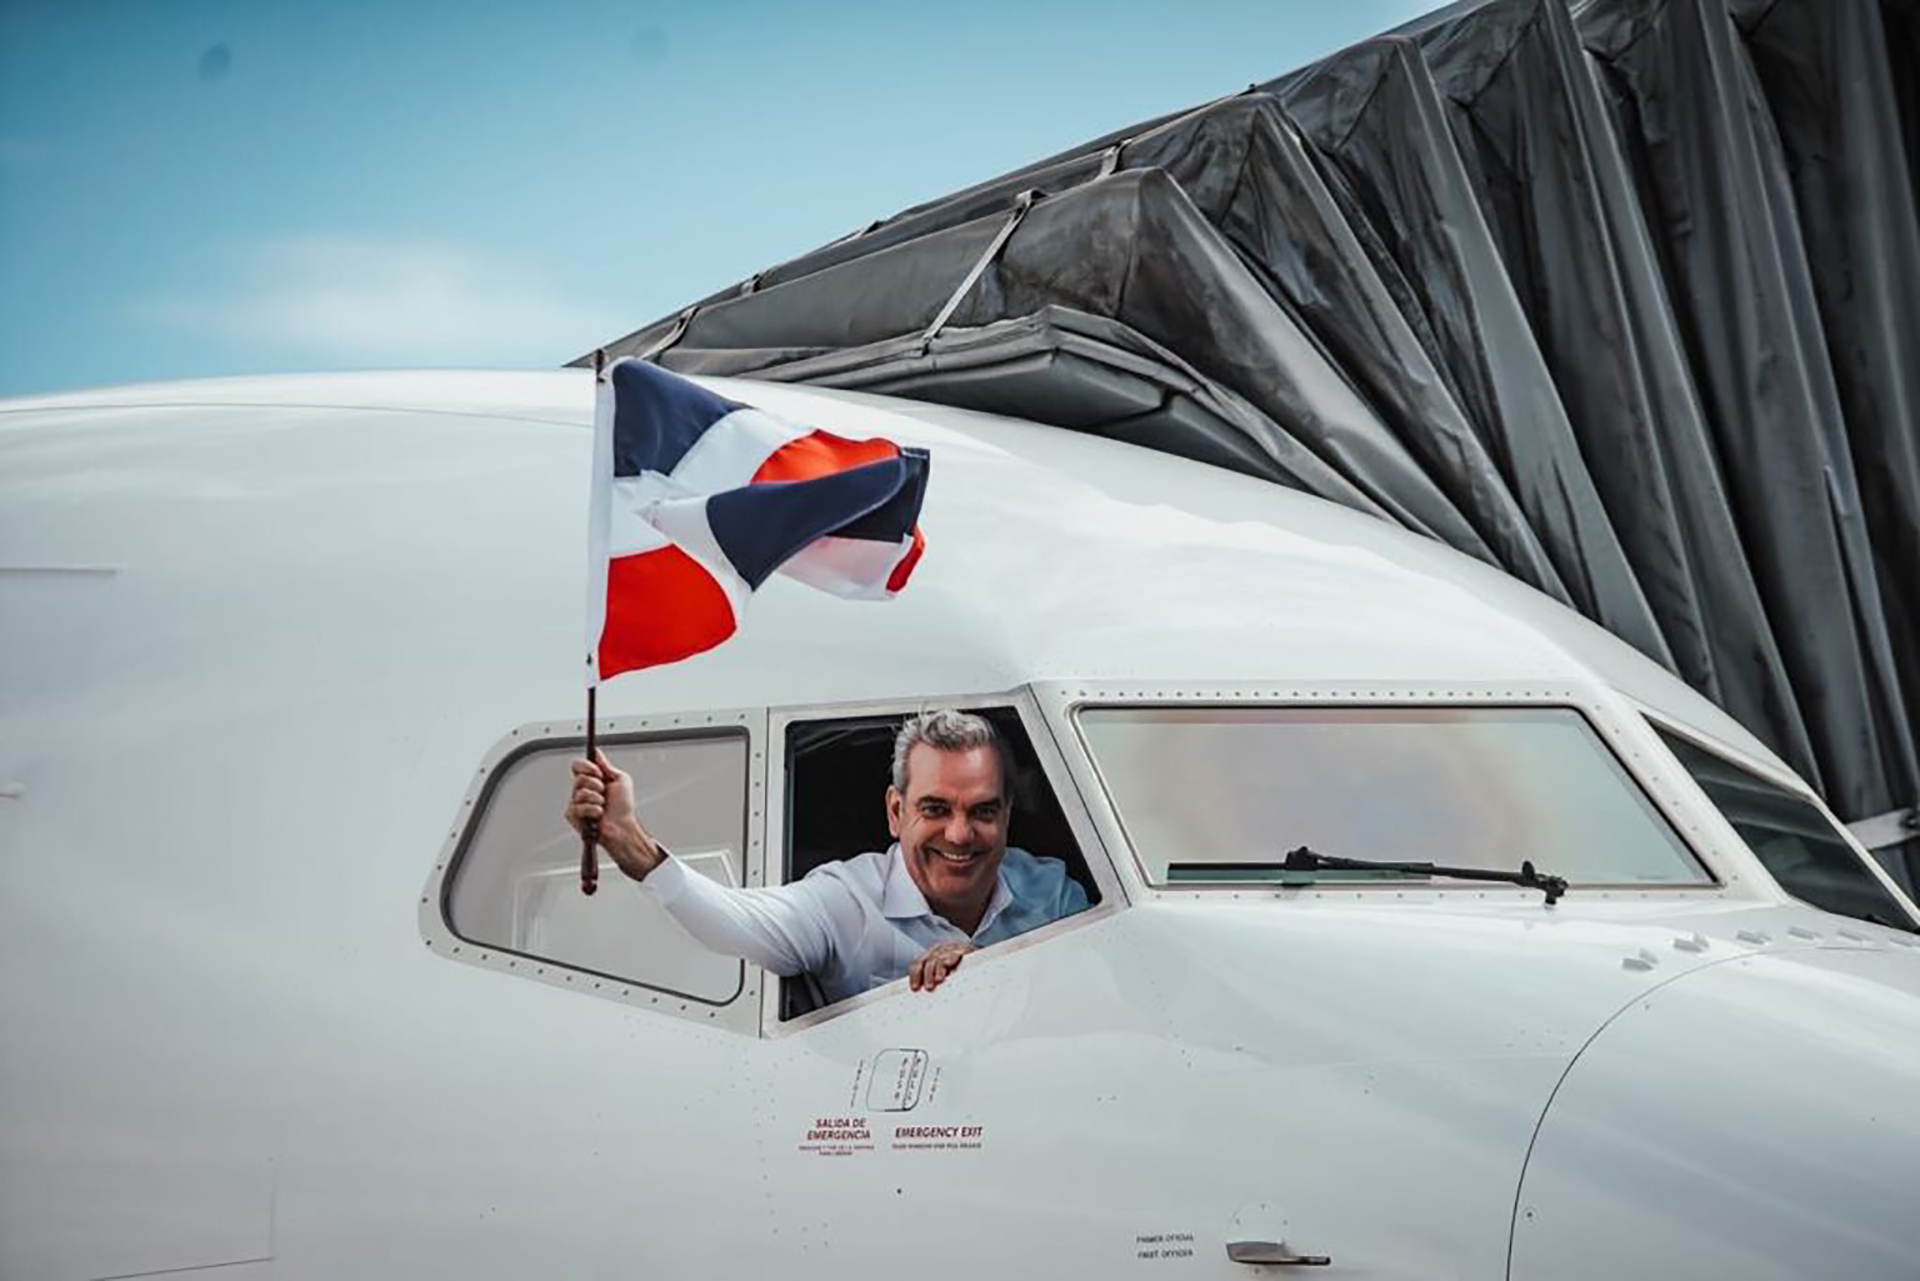 You are currently viewing AraJet, the new Dominican airline, to take off in May